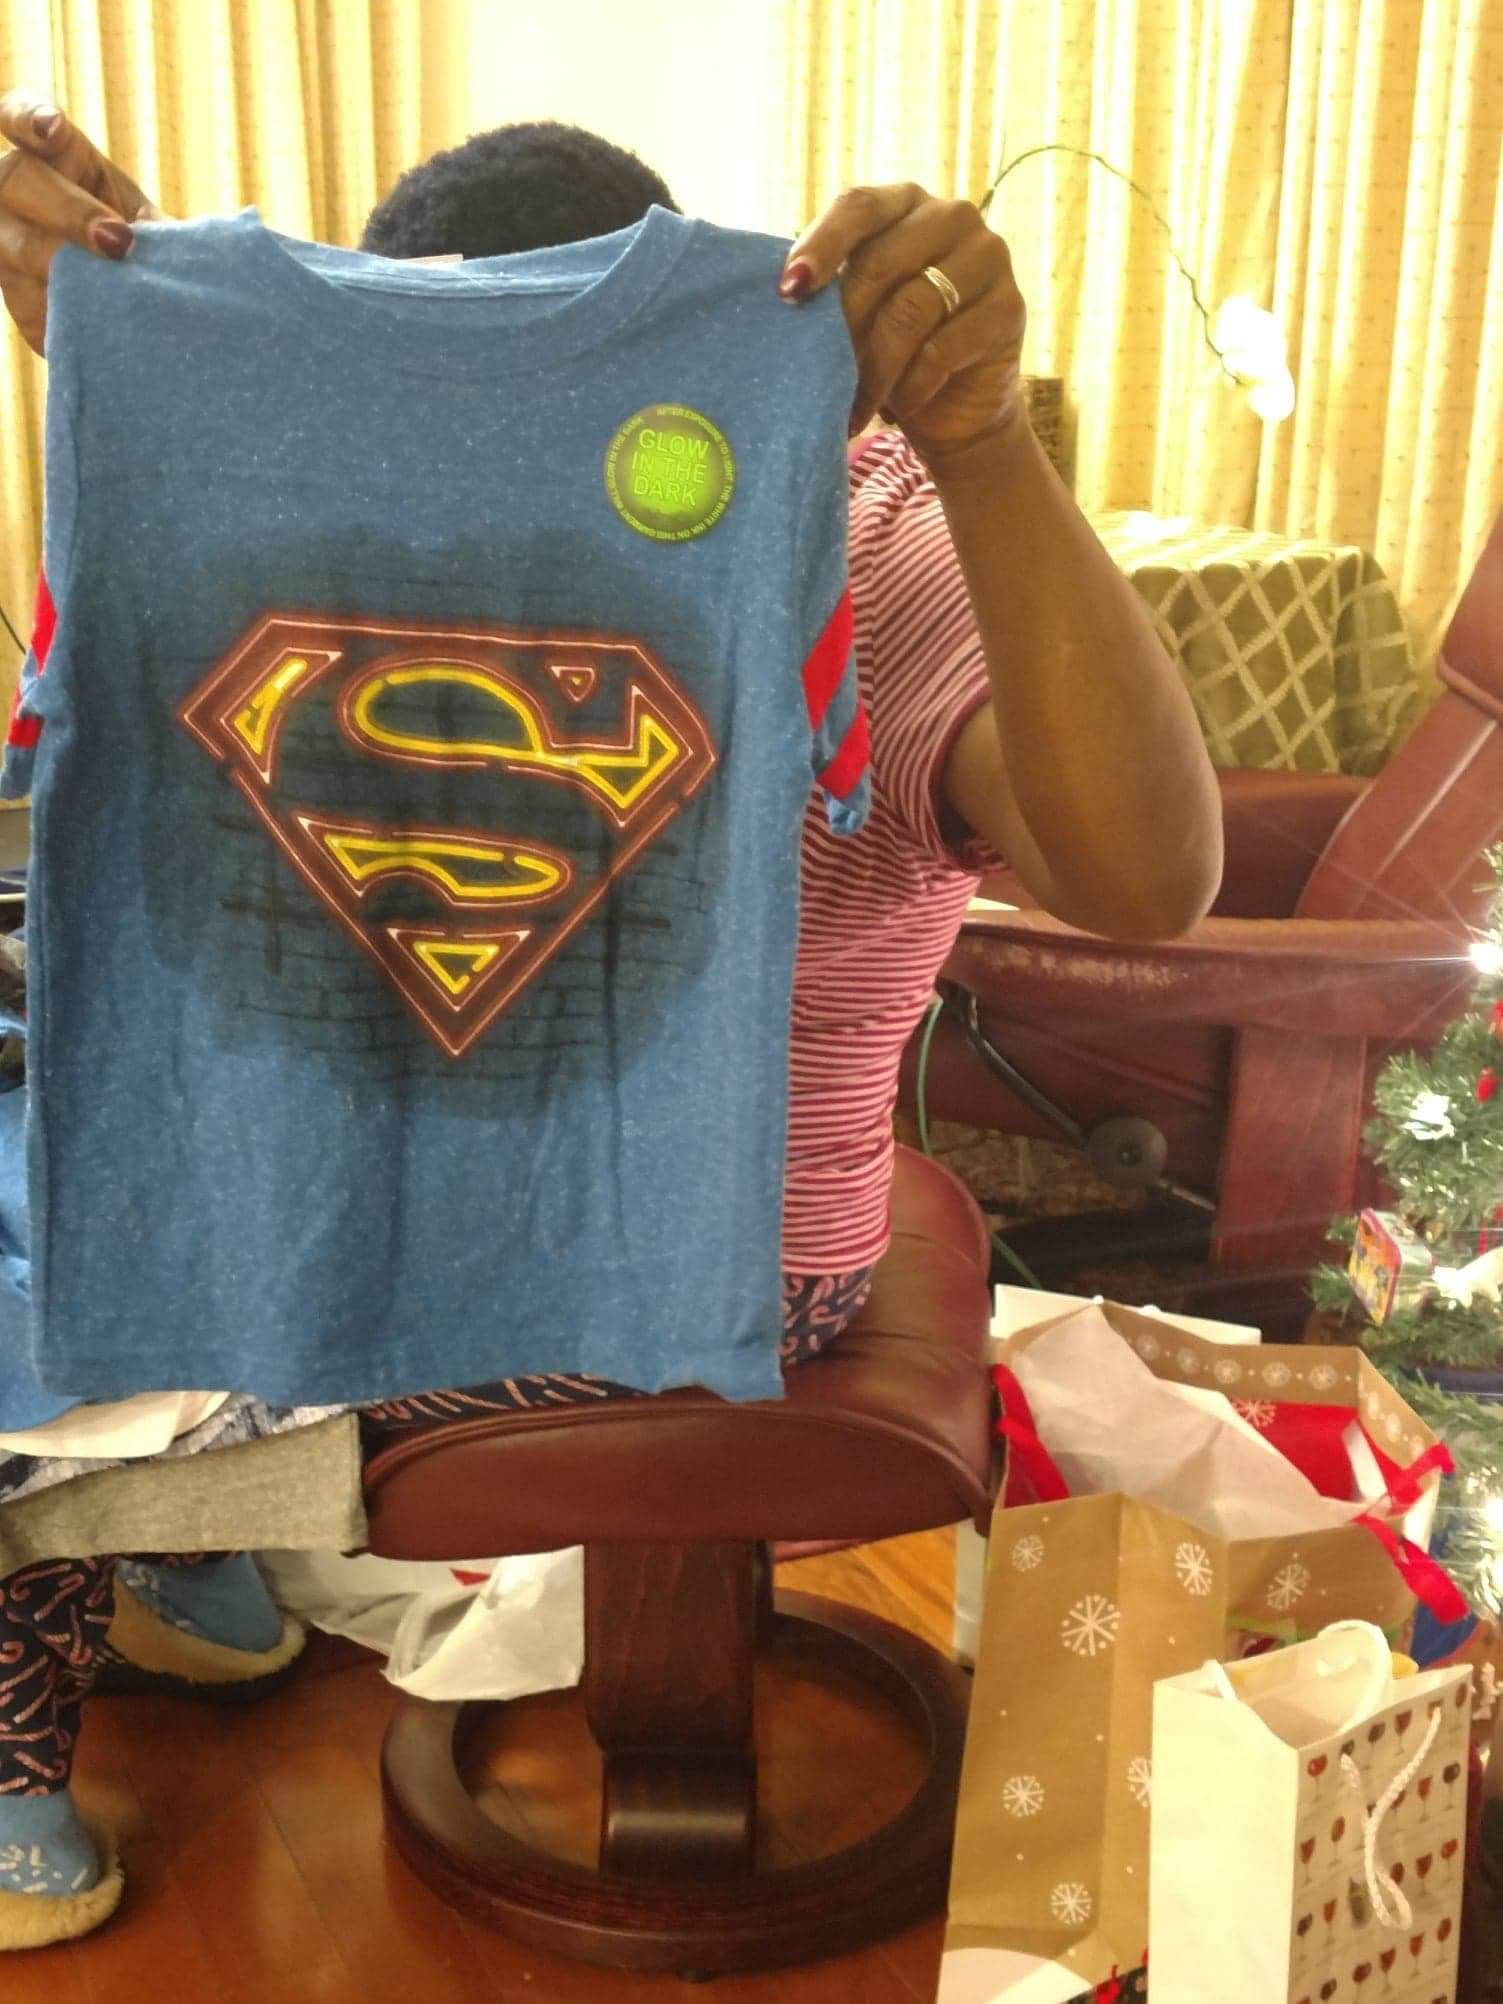 Superman t-shirt headed to Charlie in Africa, 12-18.